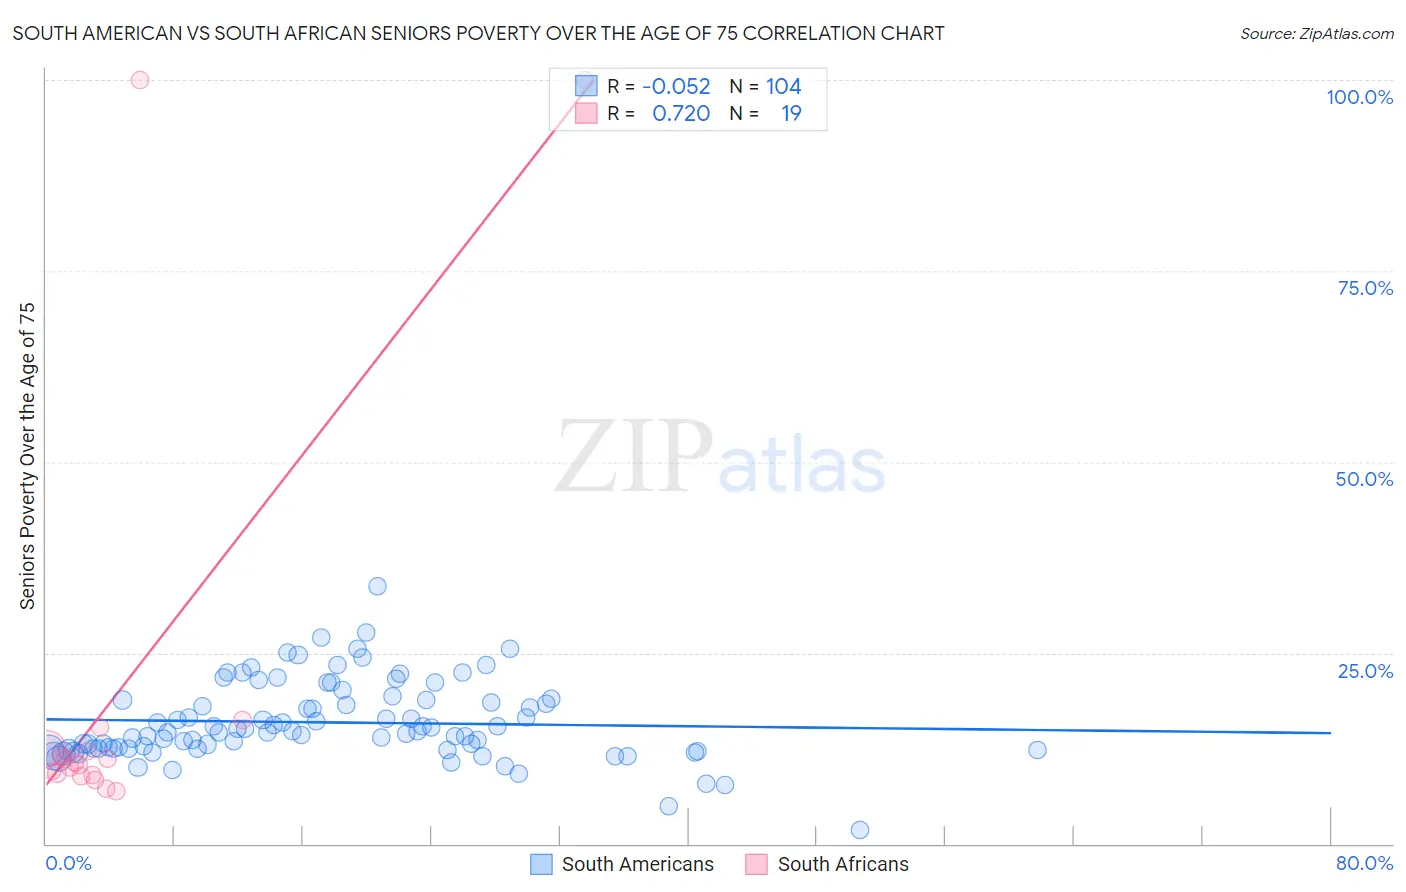 South American vs South African Seniors Poverty Over the Age of 75